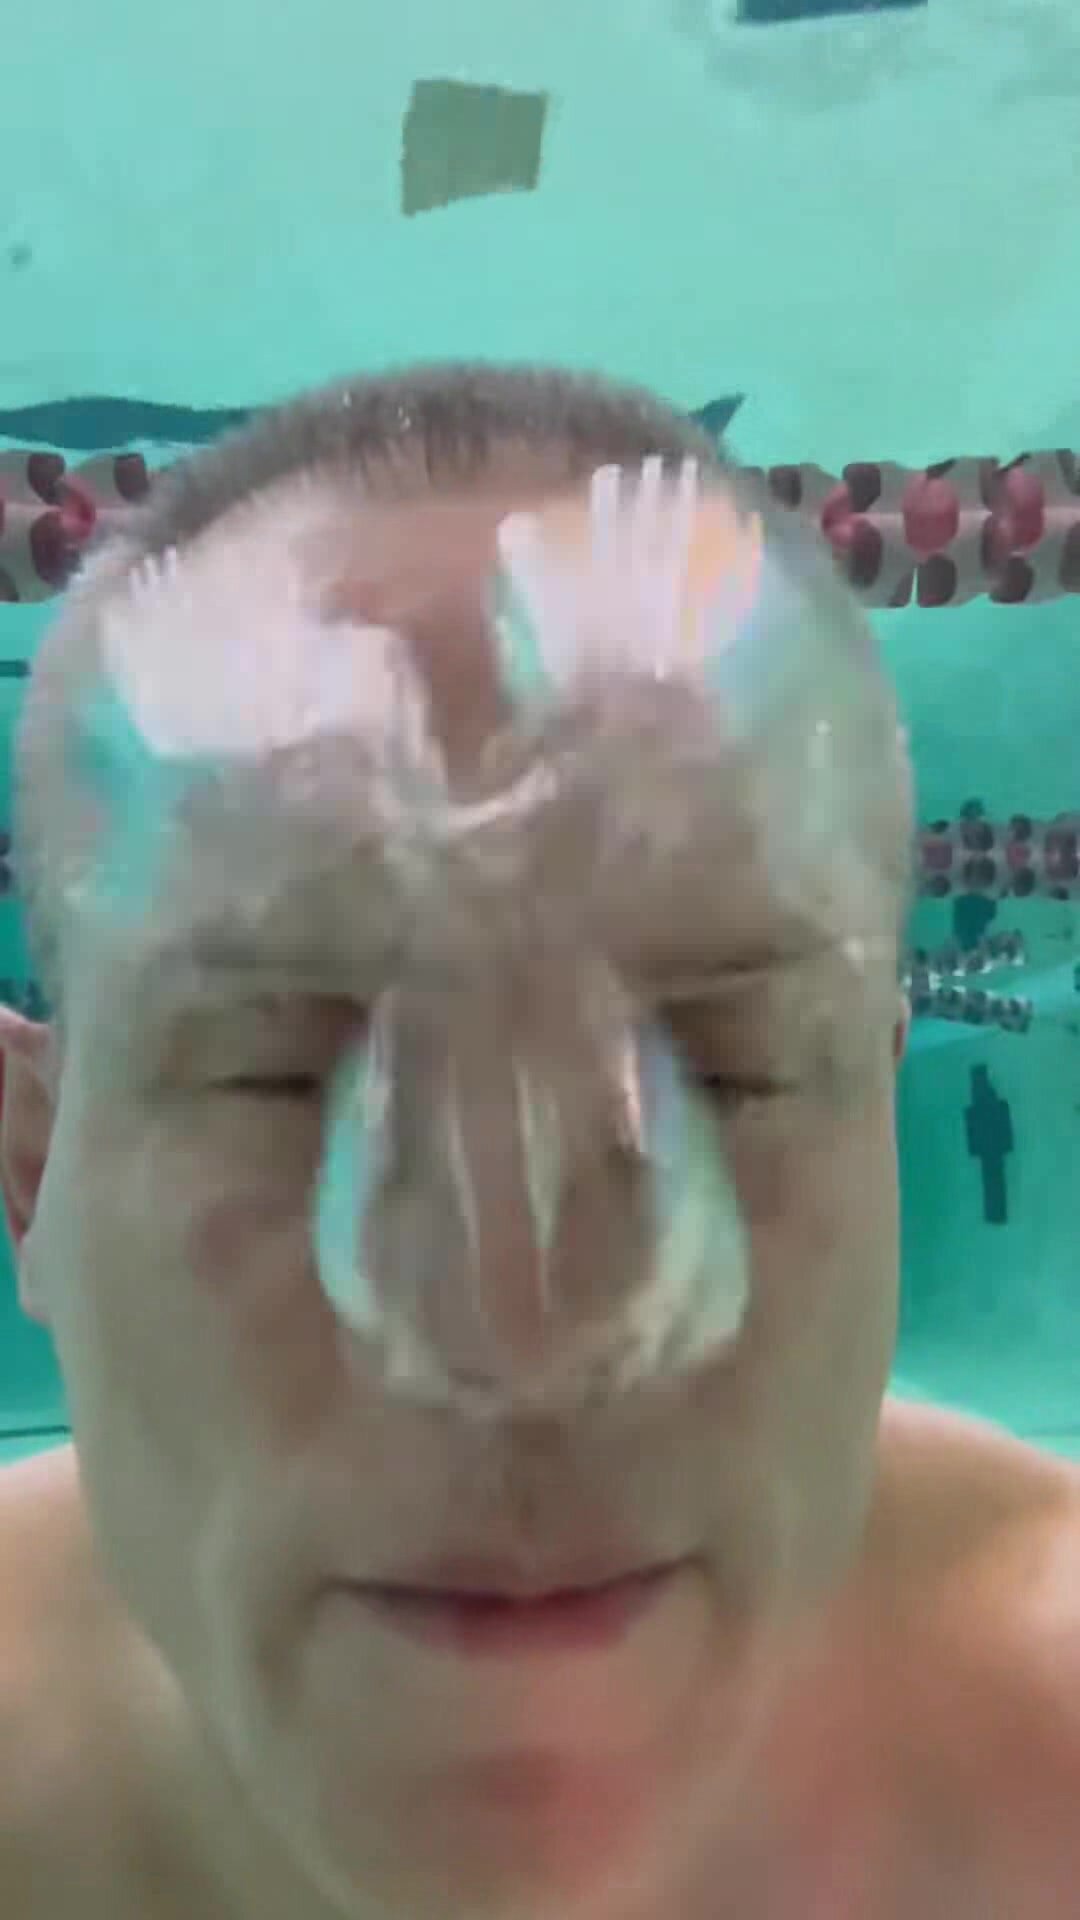 Barefaced guy blowing out air underwater